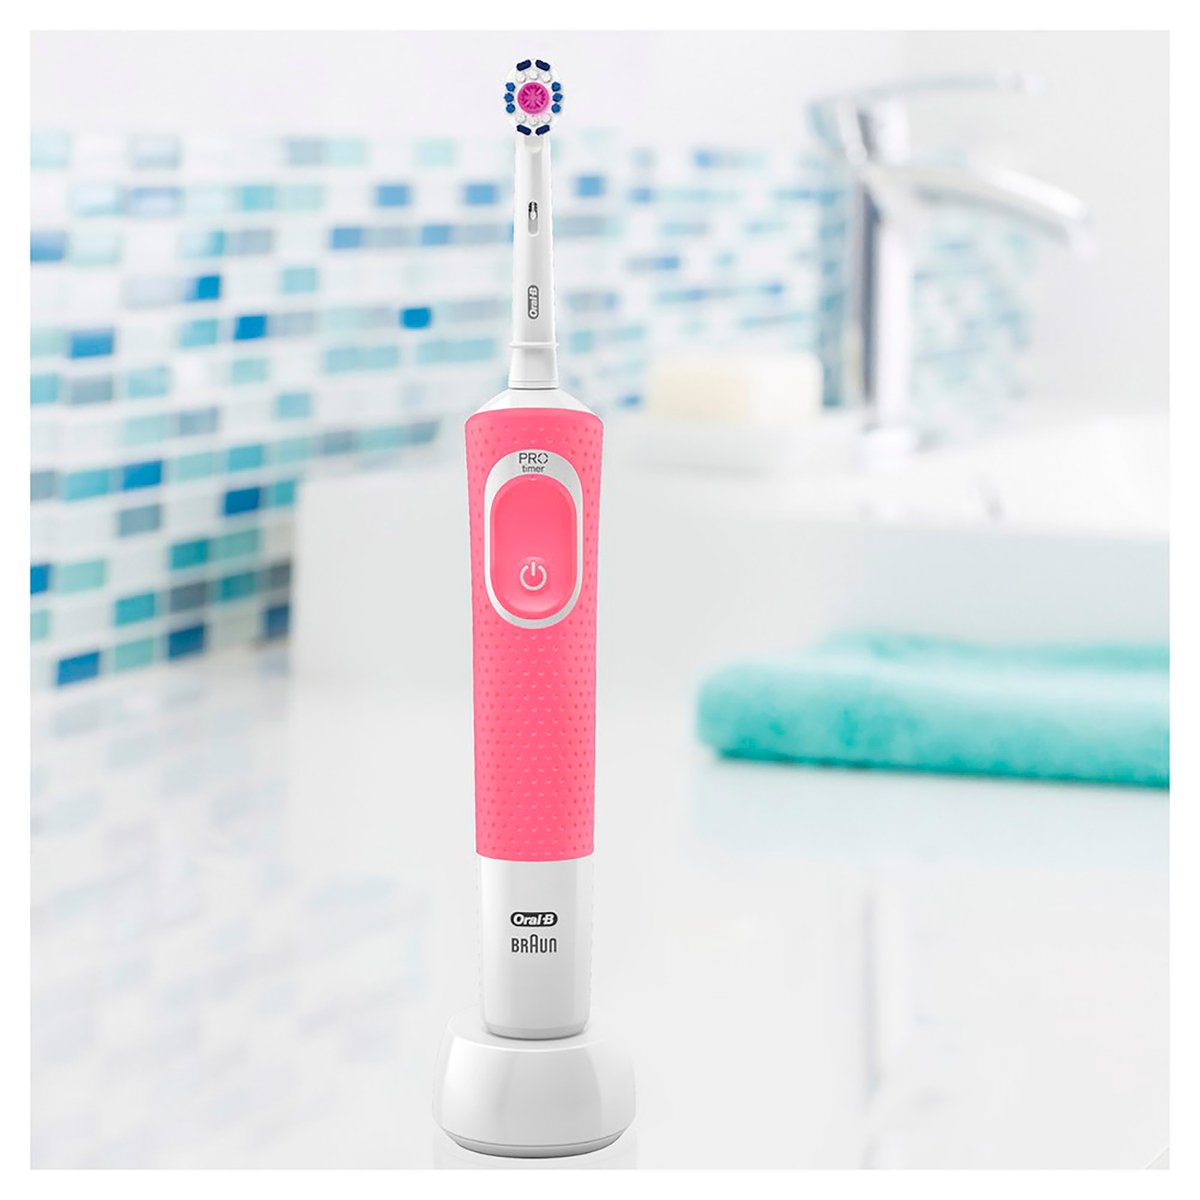 Oral-B Vitality Plus 3DWhite Rechargeable Electric Toothbrush D100.413.1 Pink